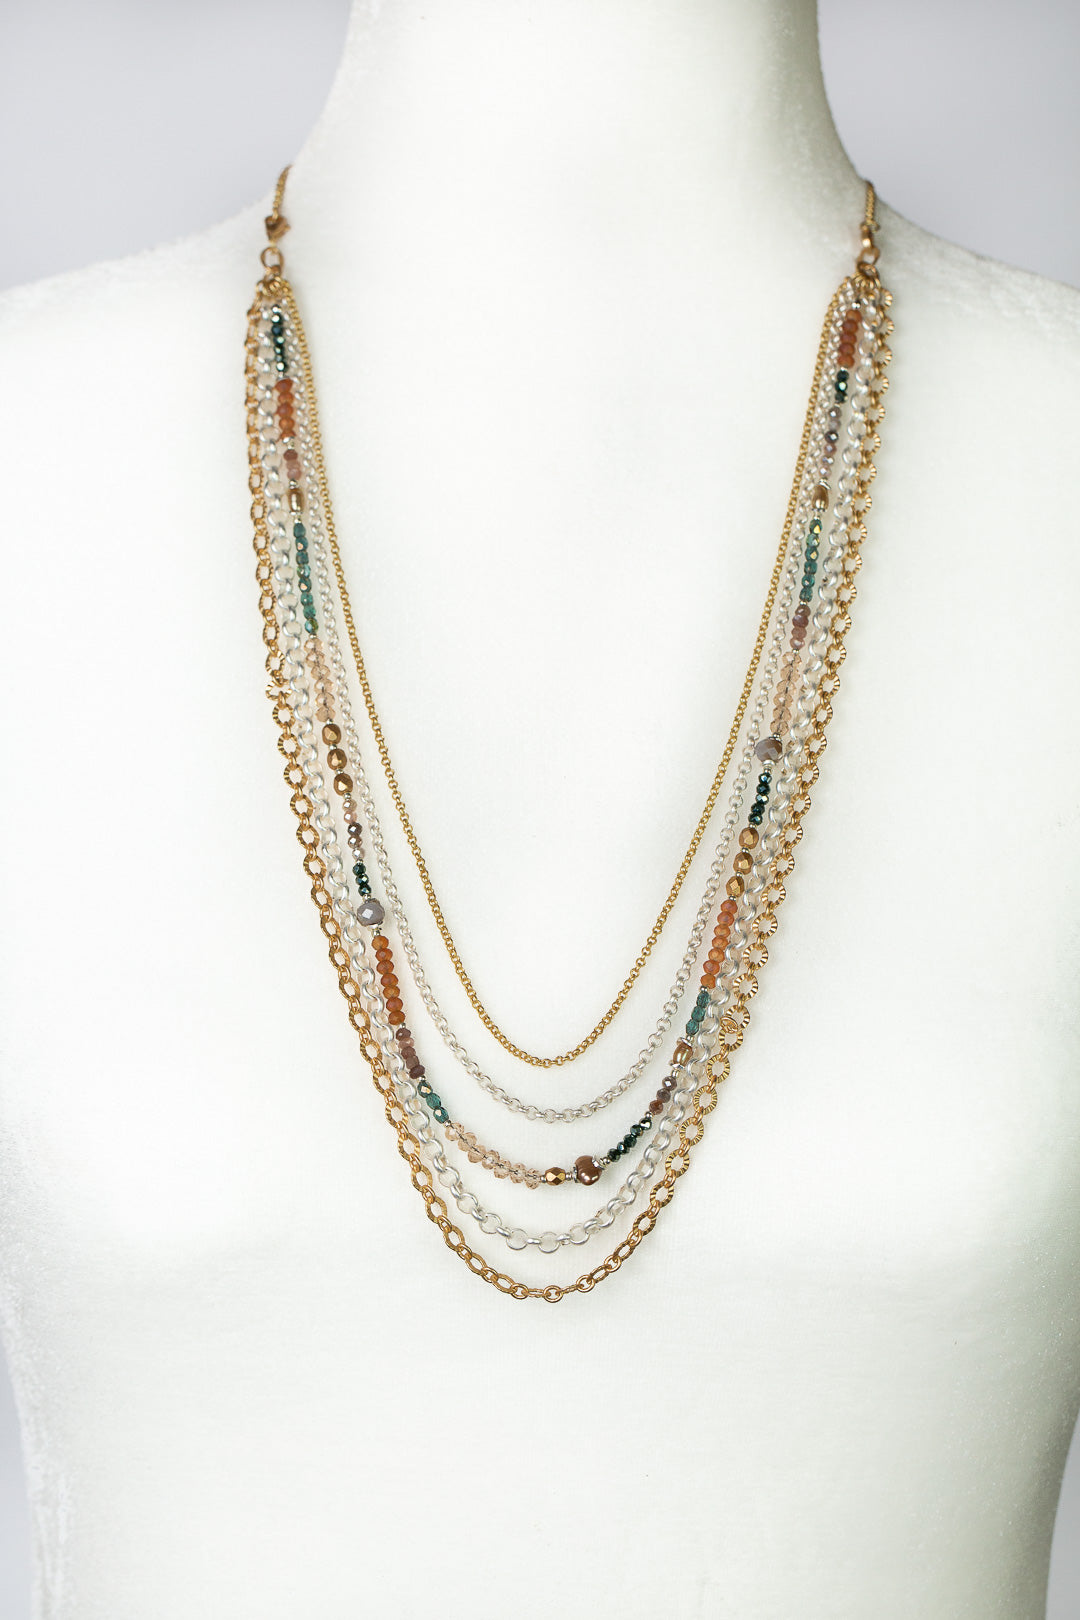 Emerald Isle 16.5 or 26.5" Moonstone, Pearl, Czech Glass Multistrand Necklace